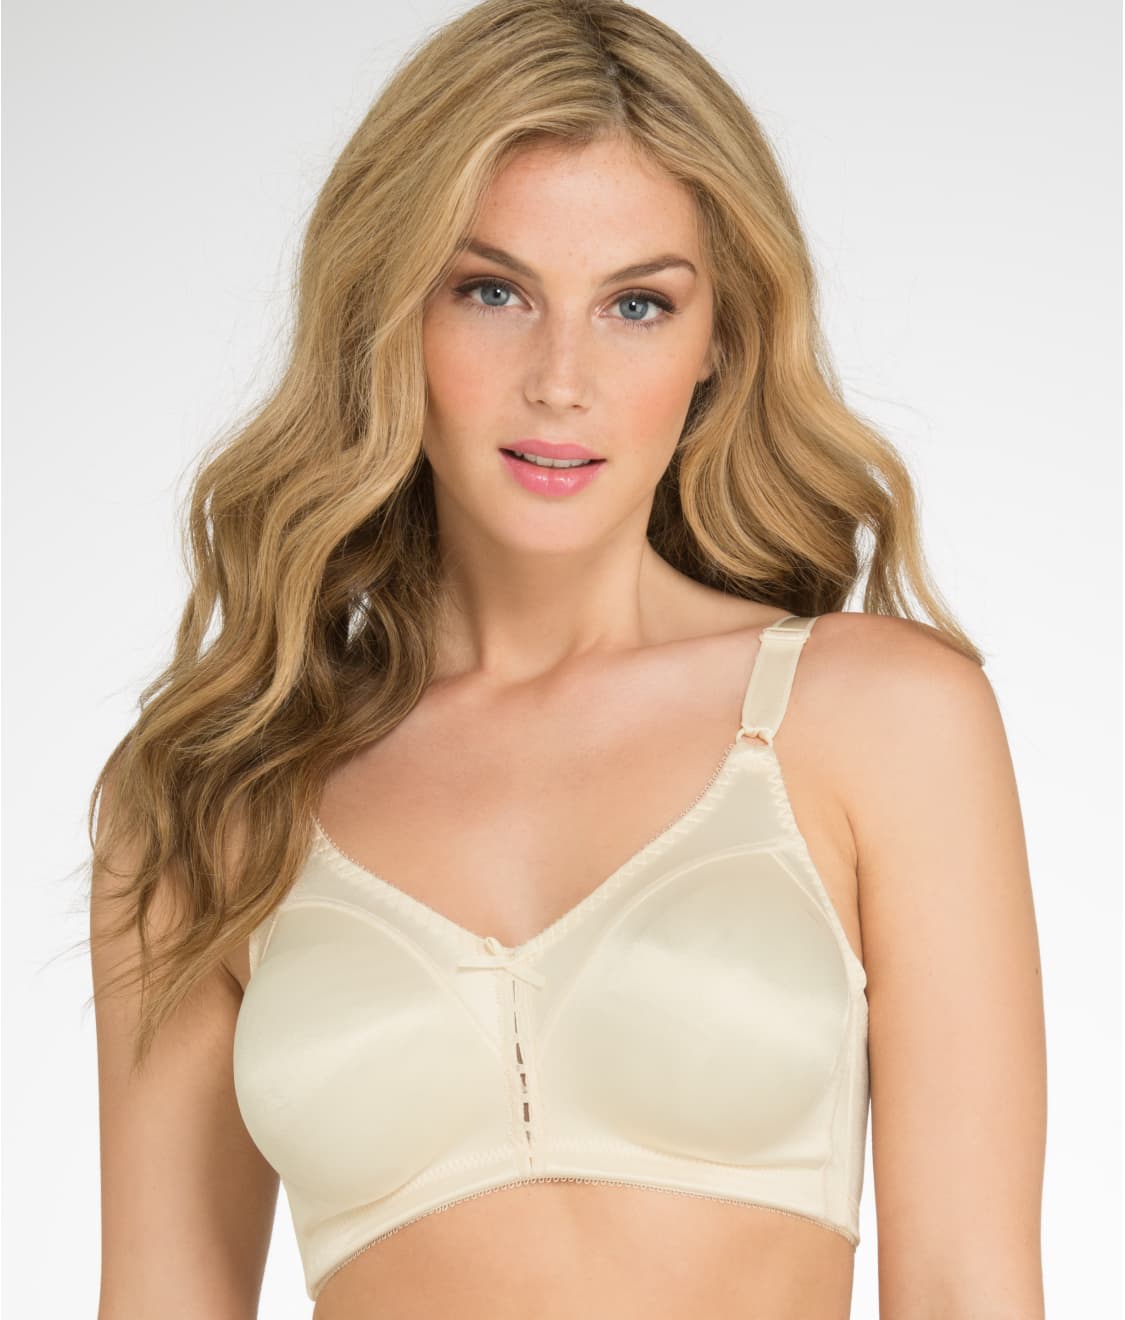 Details about  / Nice Bali Women/'s 42 DDD Double-Support Cotton White Wire Free Full Coverage Bra